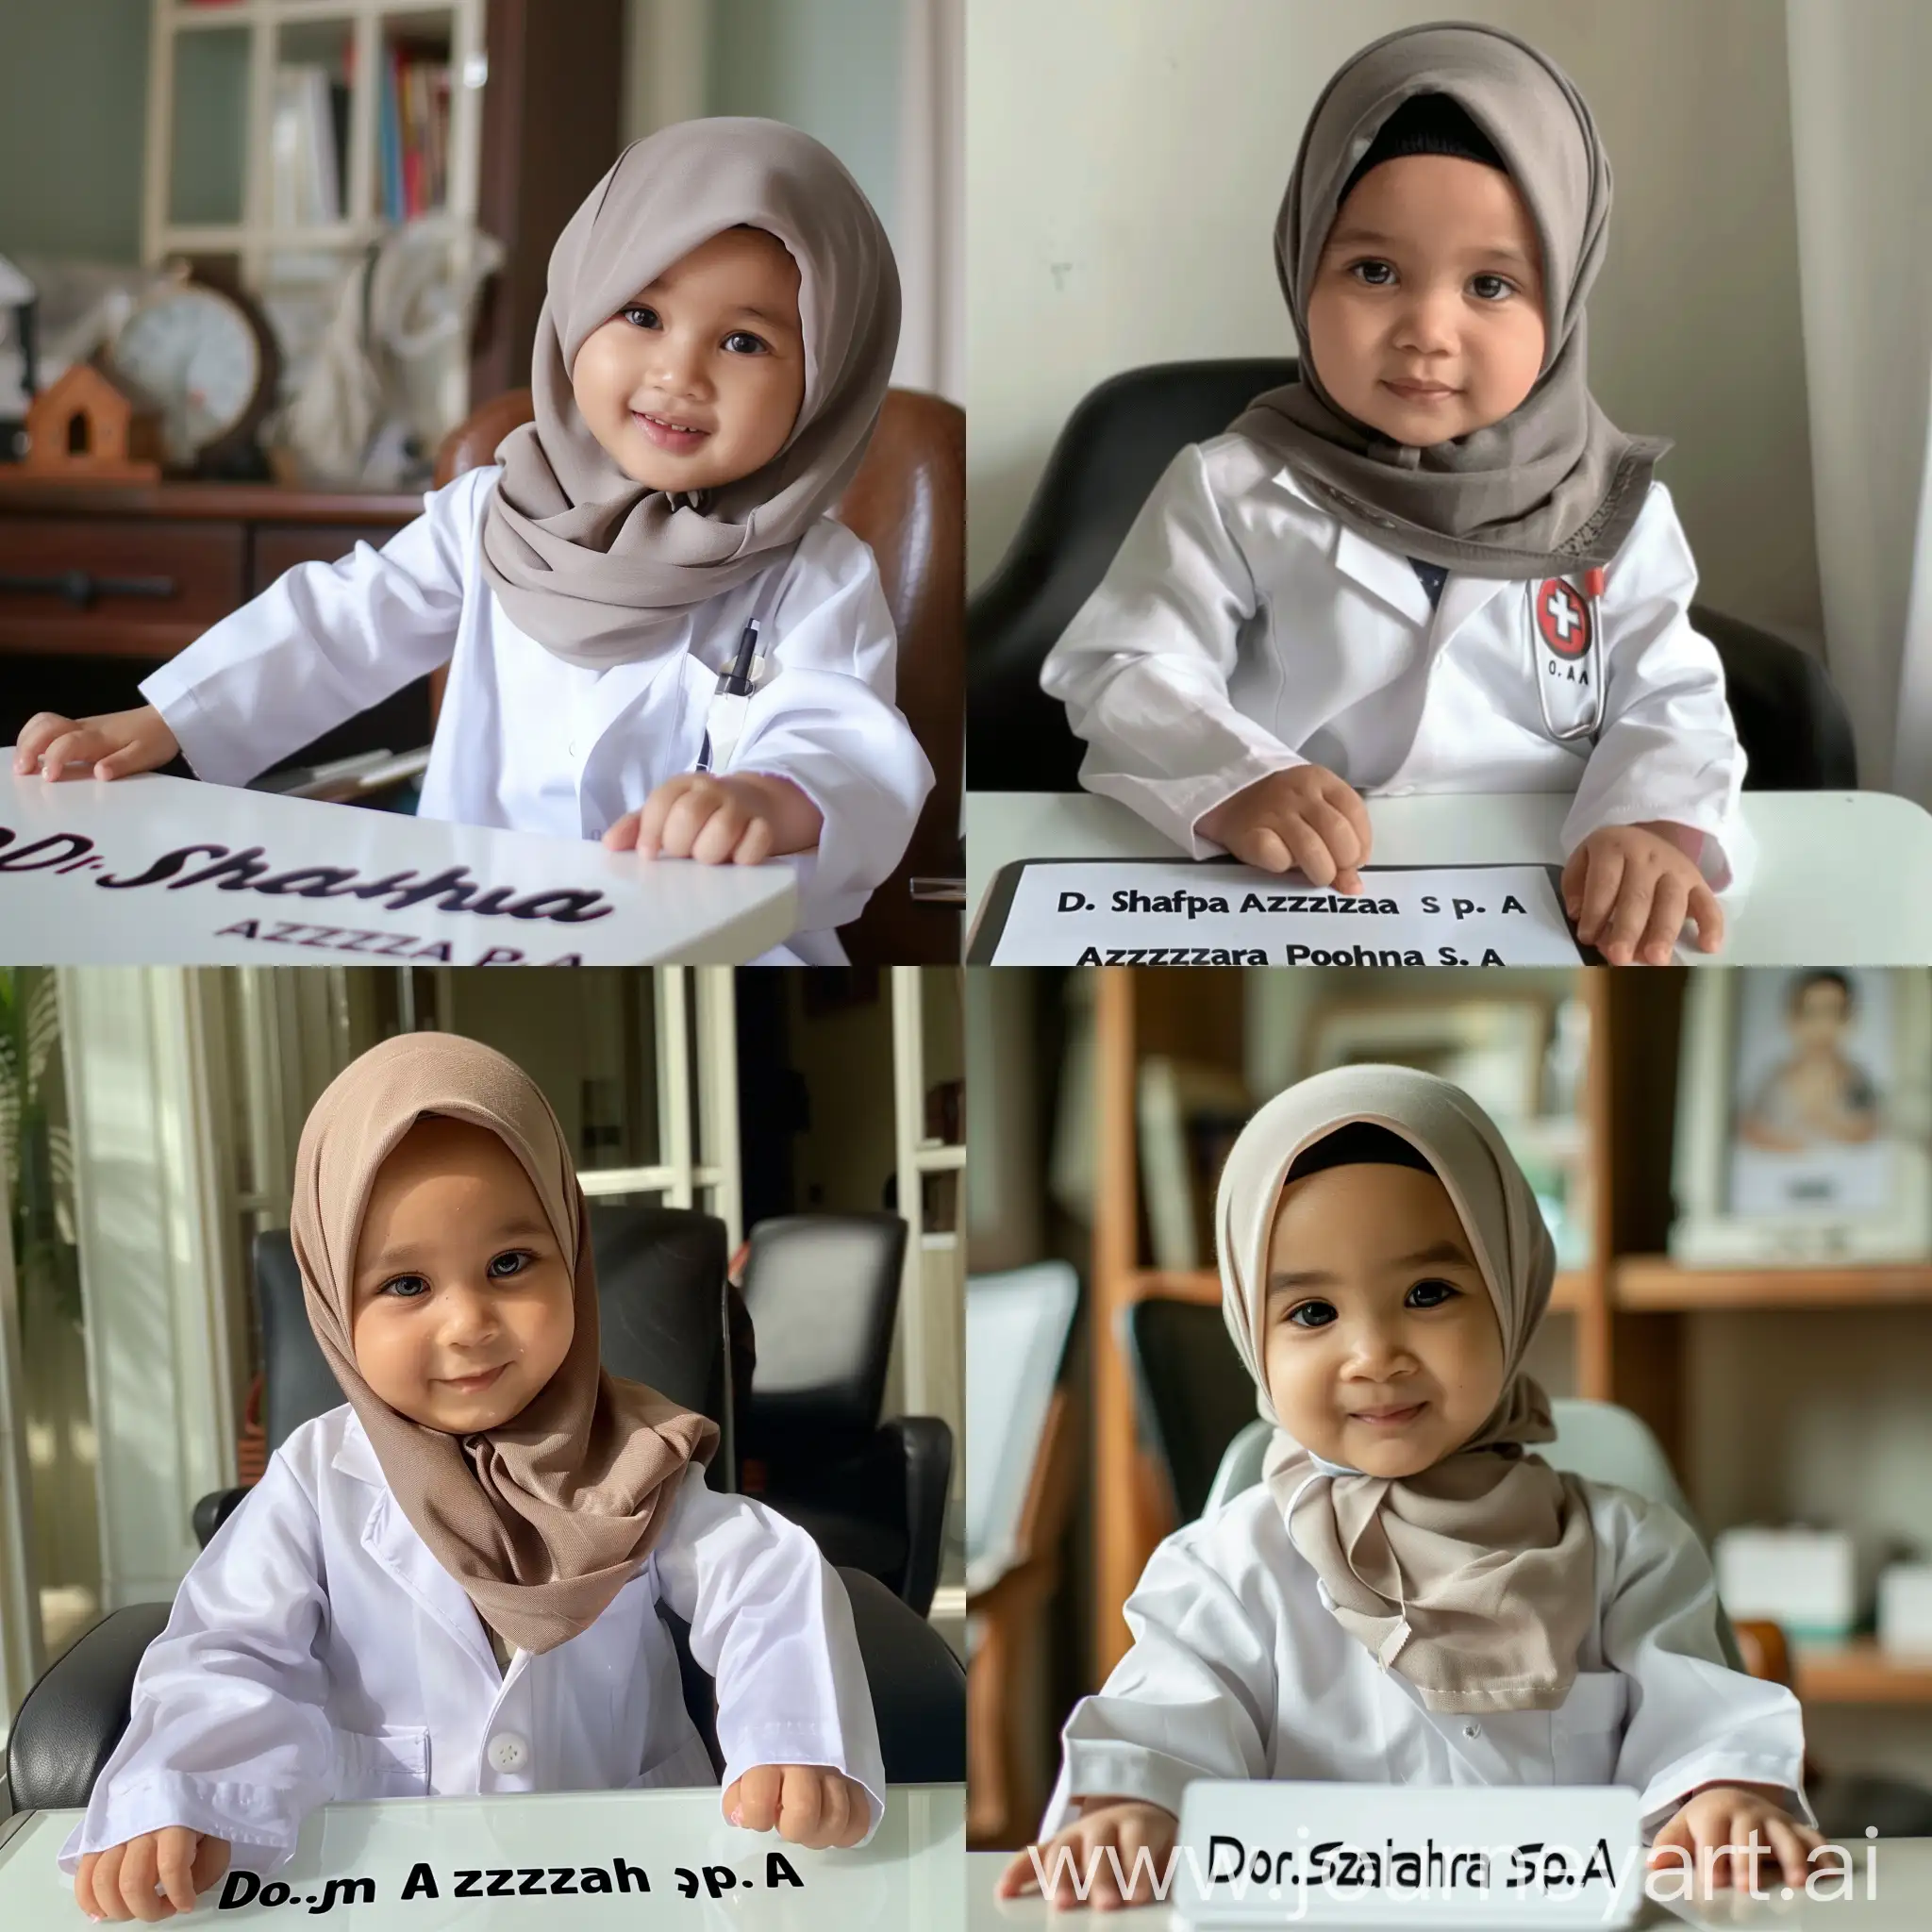 A 1,7 year old indonesian child, wearing a hijab, wearing a white doctor's coat, sitting on a chair ,on the table there is a name with the text "dr.Shafwah Azzahra pohan Sp.A"